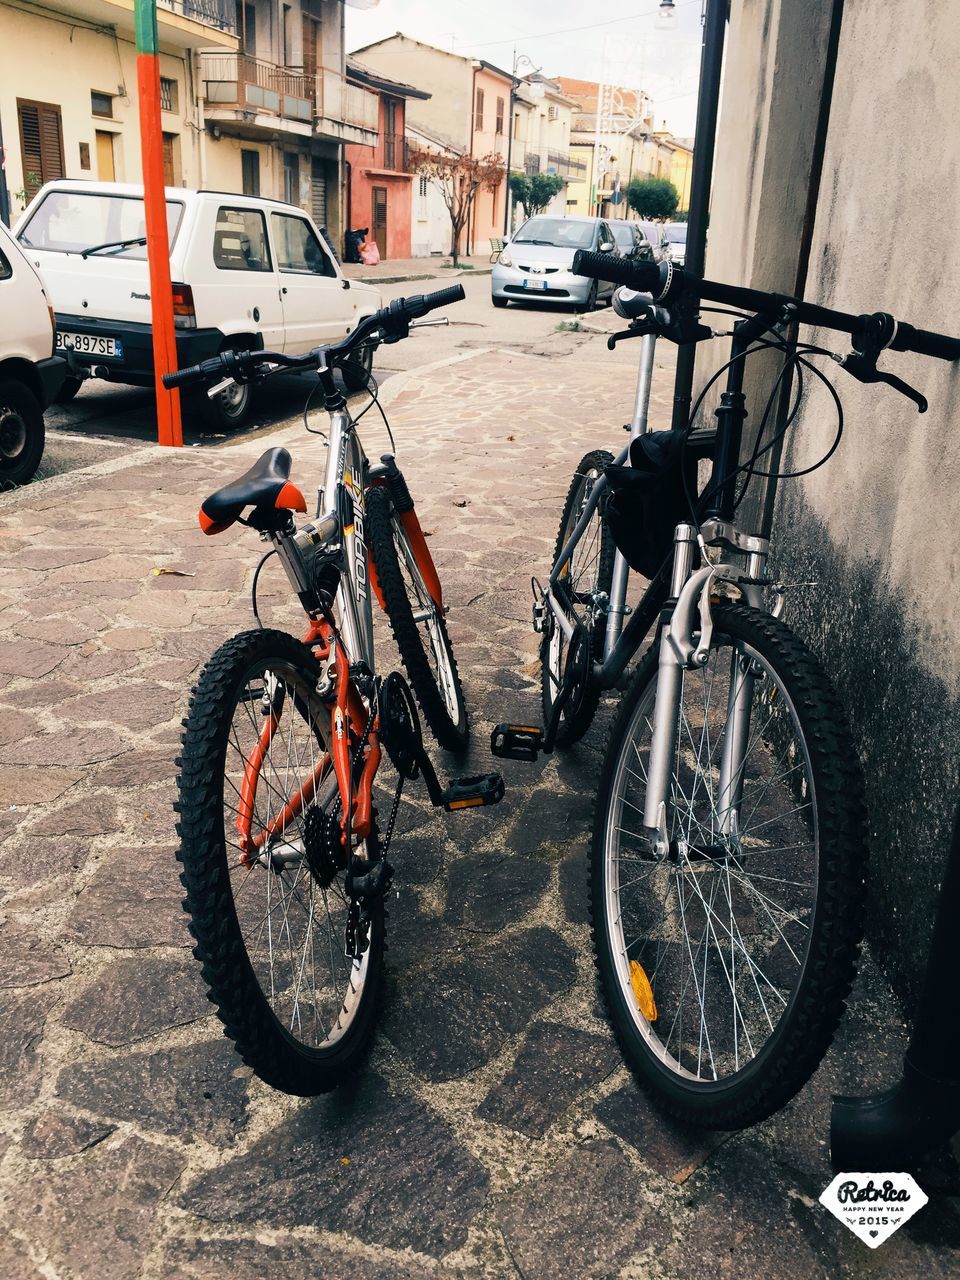 bicycle, transportation, mode of transport, land vehicle, stationary, parked, parking, street, road, building exterior, architecture, cycle, built structure, car, travel, riding, day, outdoors, parking lot, motorcycle